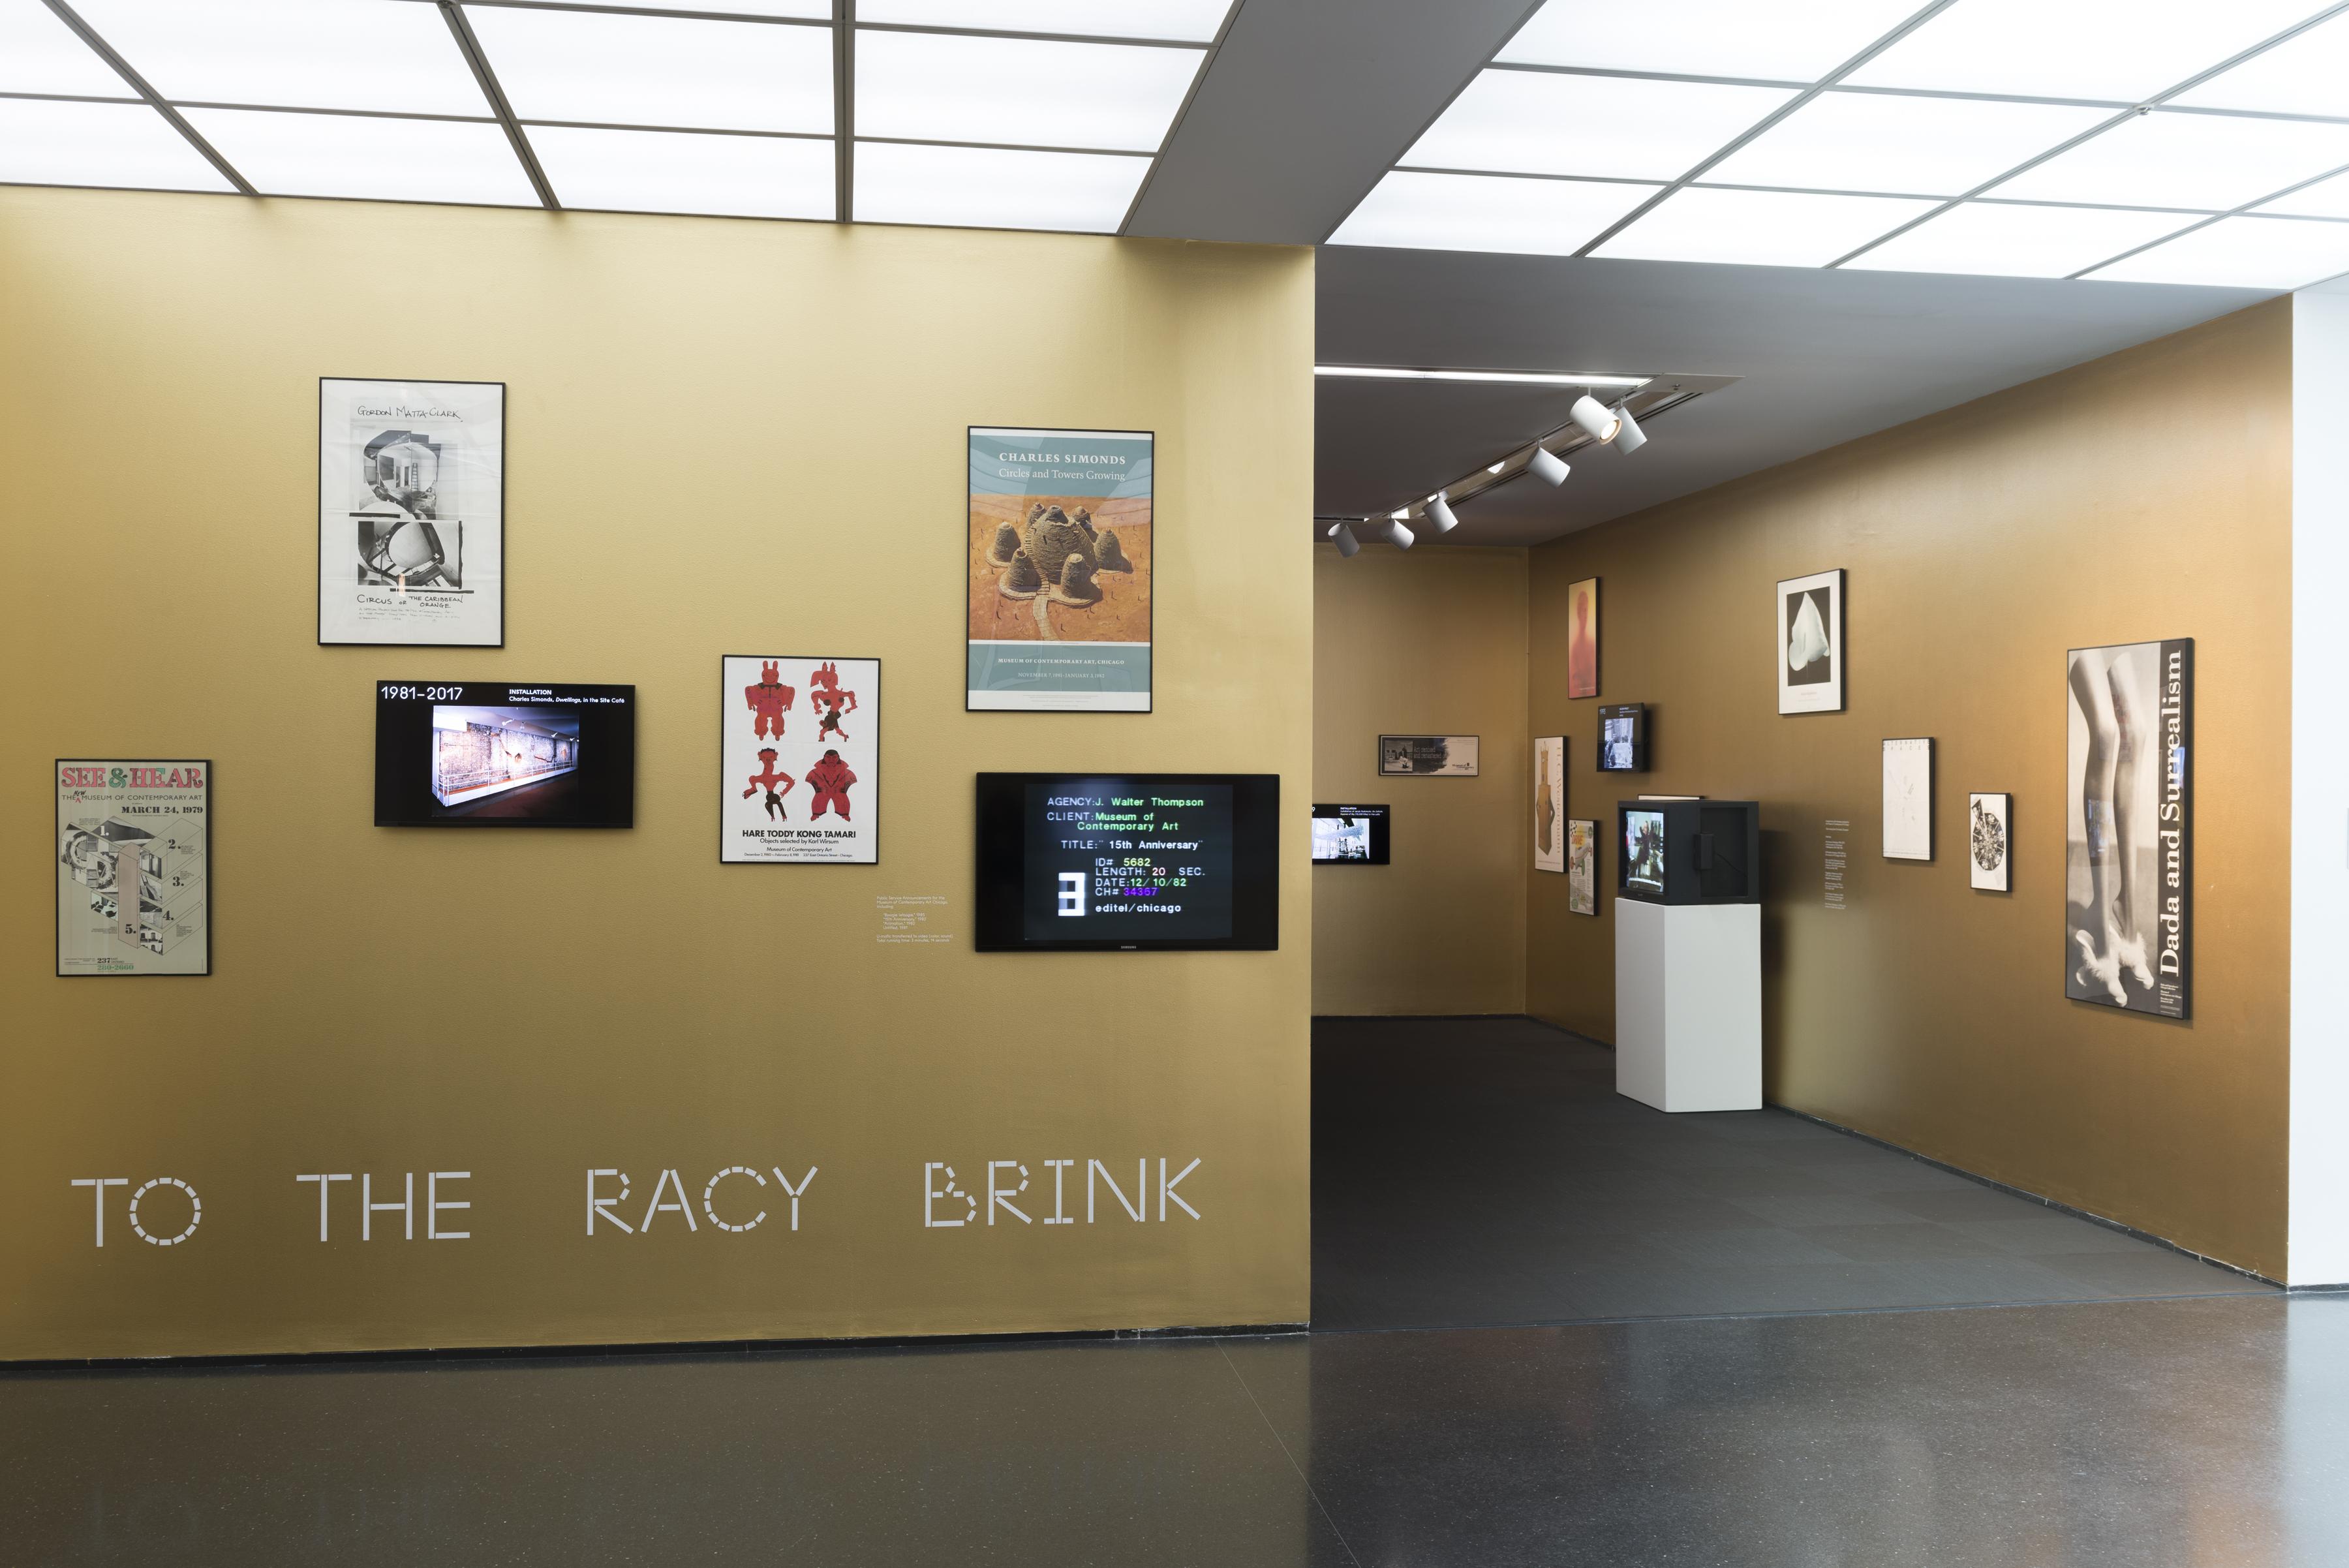 View of gallery with vinyl wall lettering that reads 'TO THE RACY BRINK'